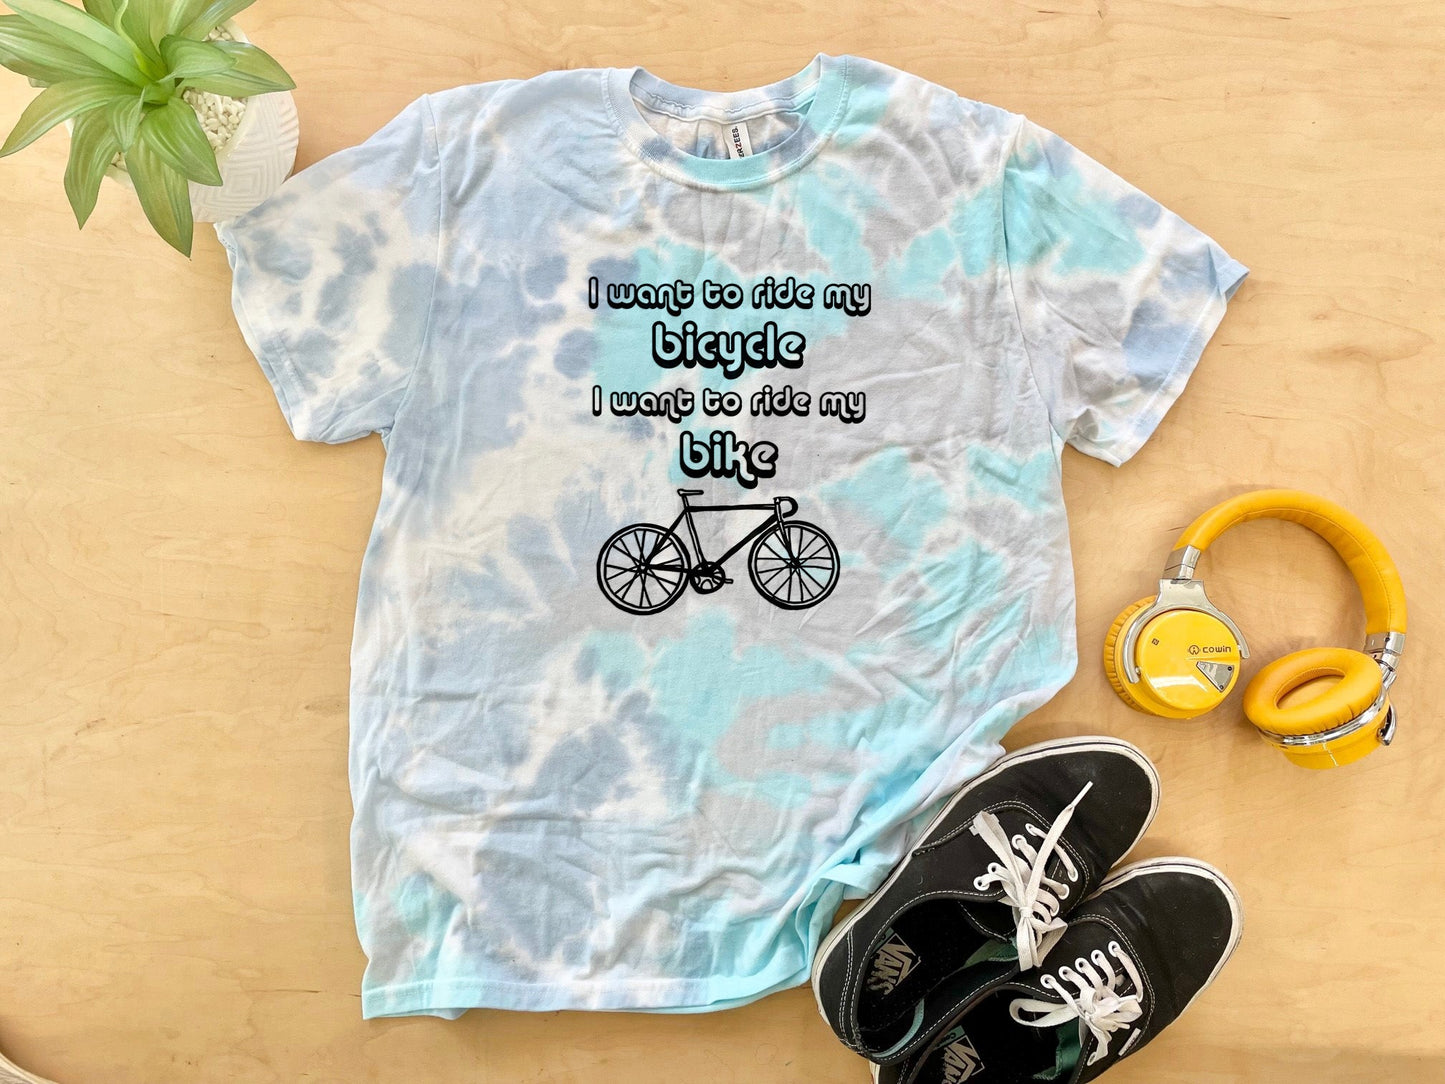 I Want To Ride My Bicycle, I Want To Ride My Bike - Mens/Unisex Tie Dye Tee - Blue